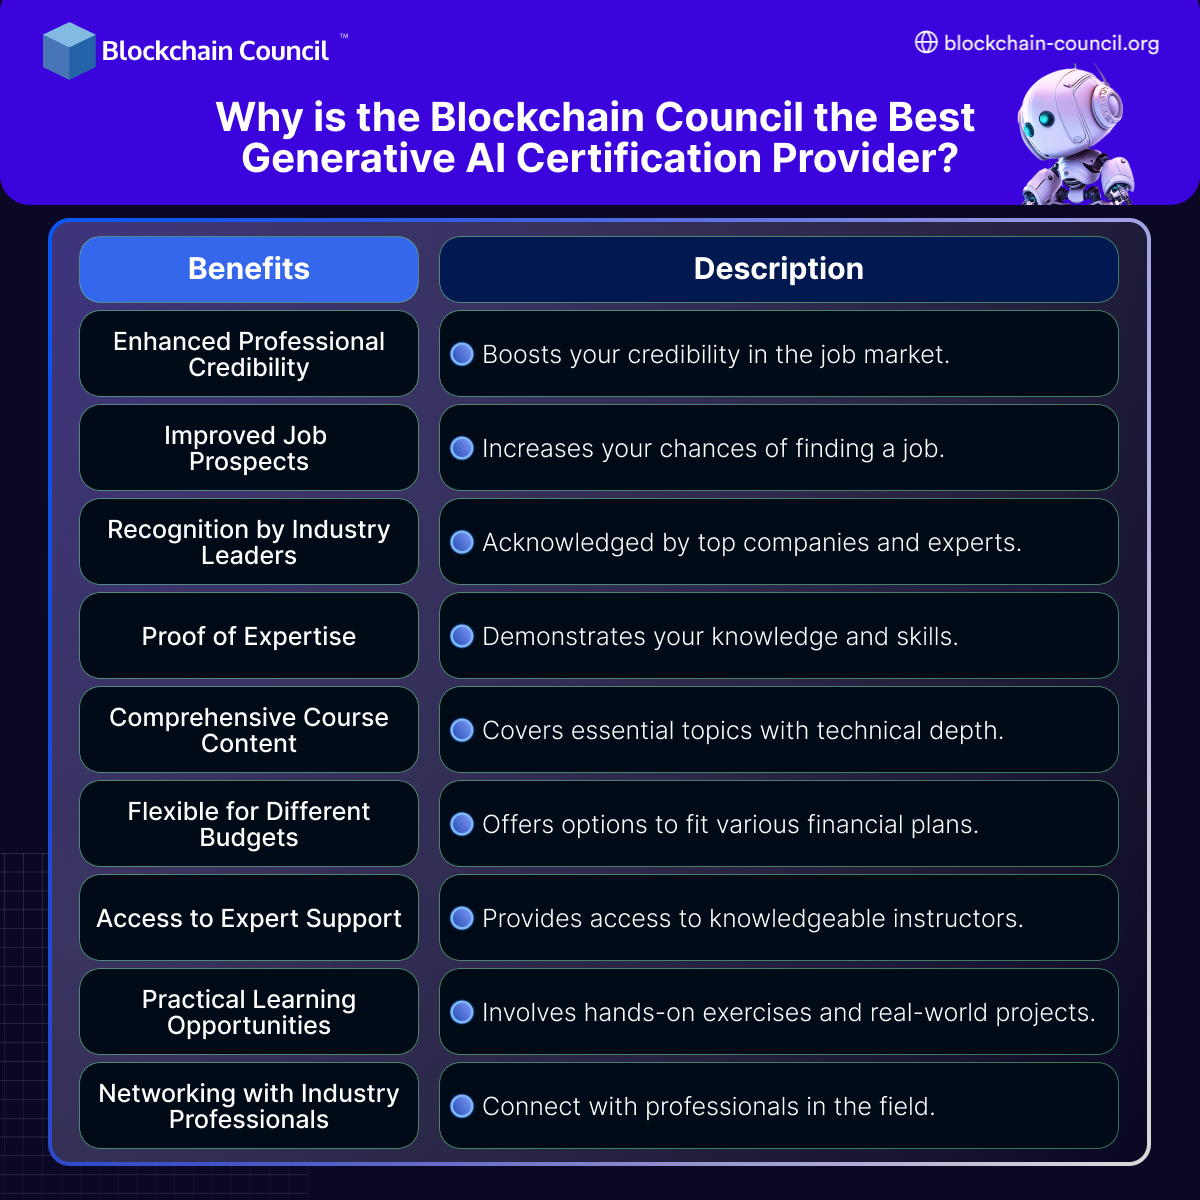 Why is the Blockchain Council the Best Generative AI Certification Provider?